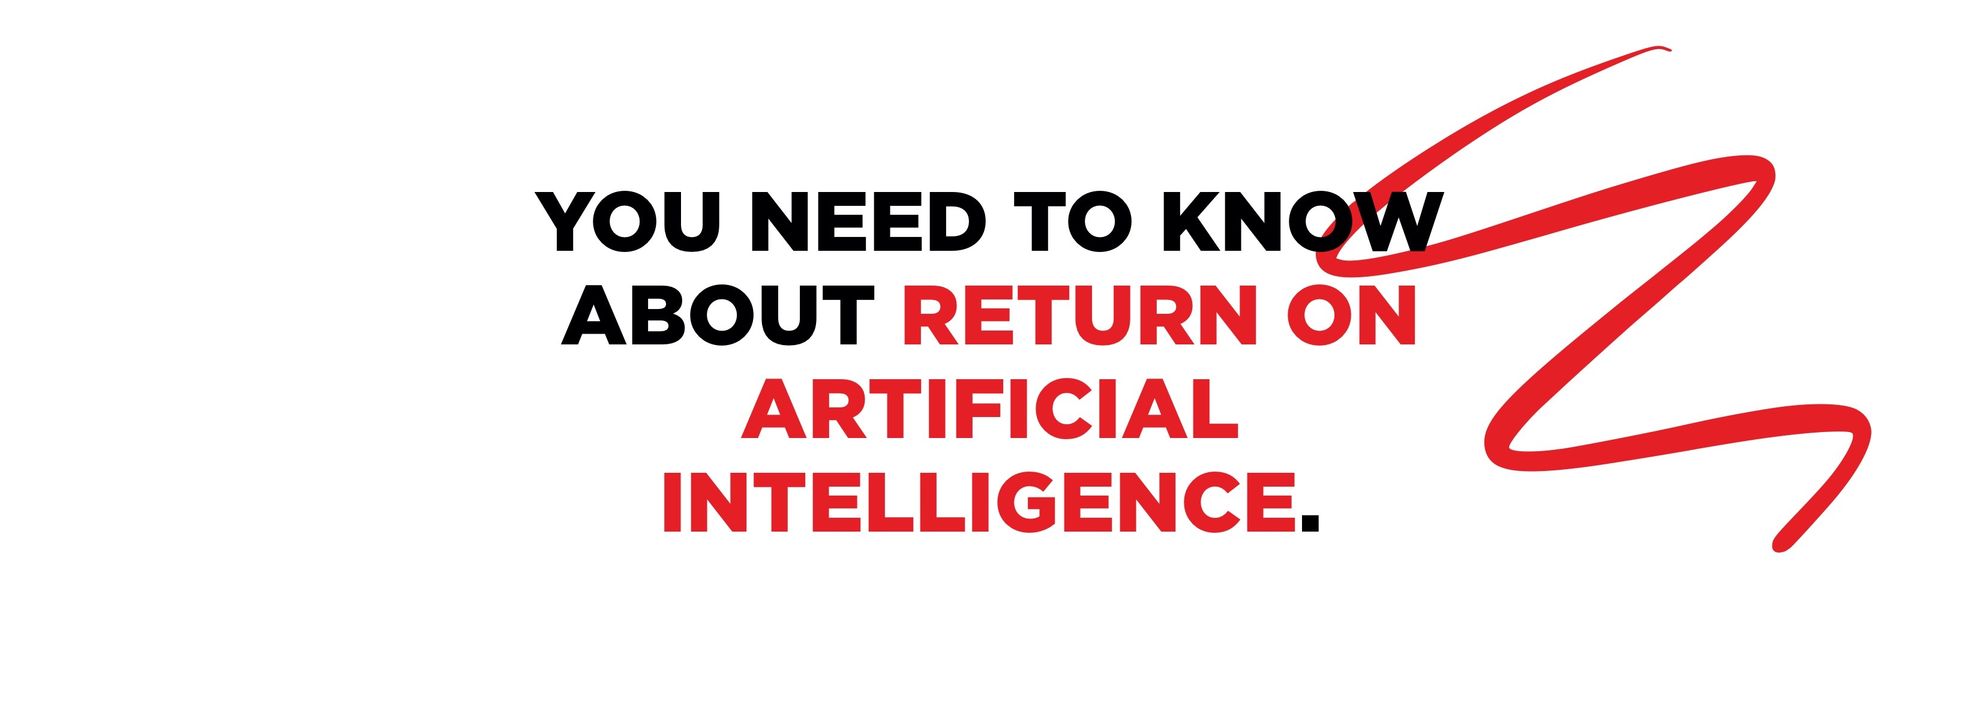 AI's ROI grows with time. You just don't realize that yet. Let's call it ROA.